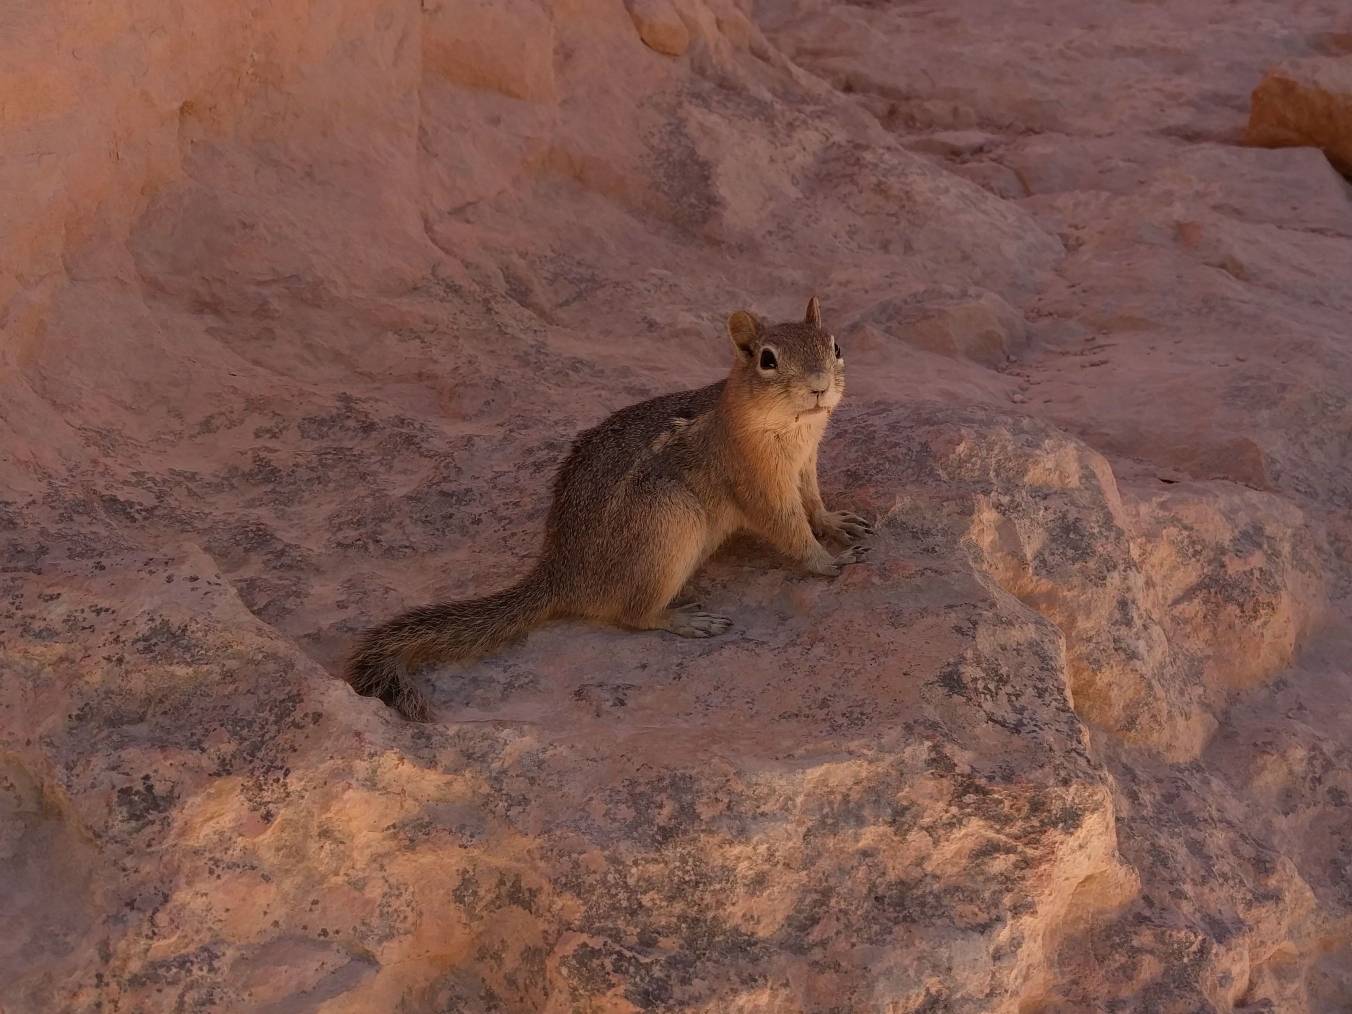 Image: A ground squirrel at the Navajo Loop Trail